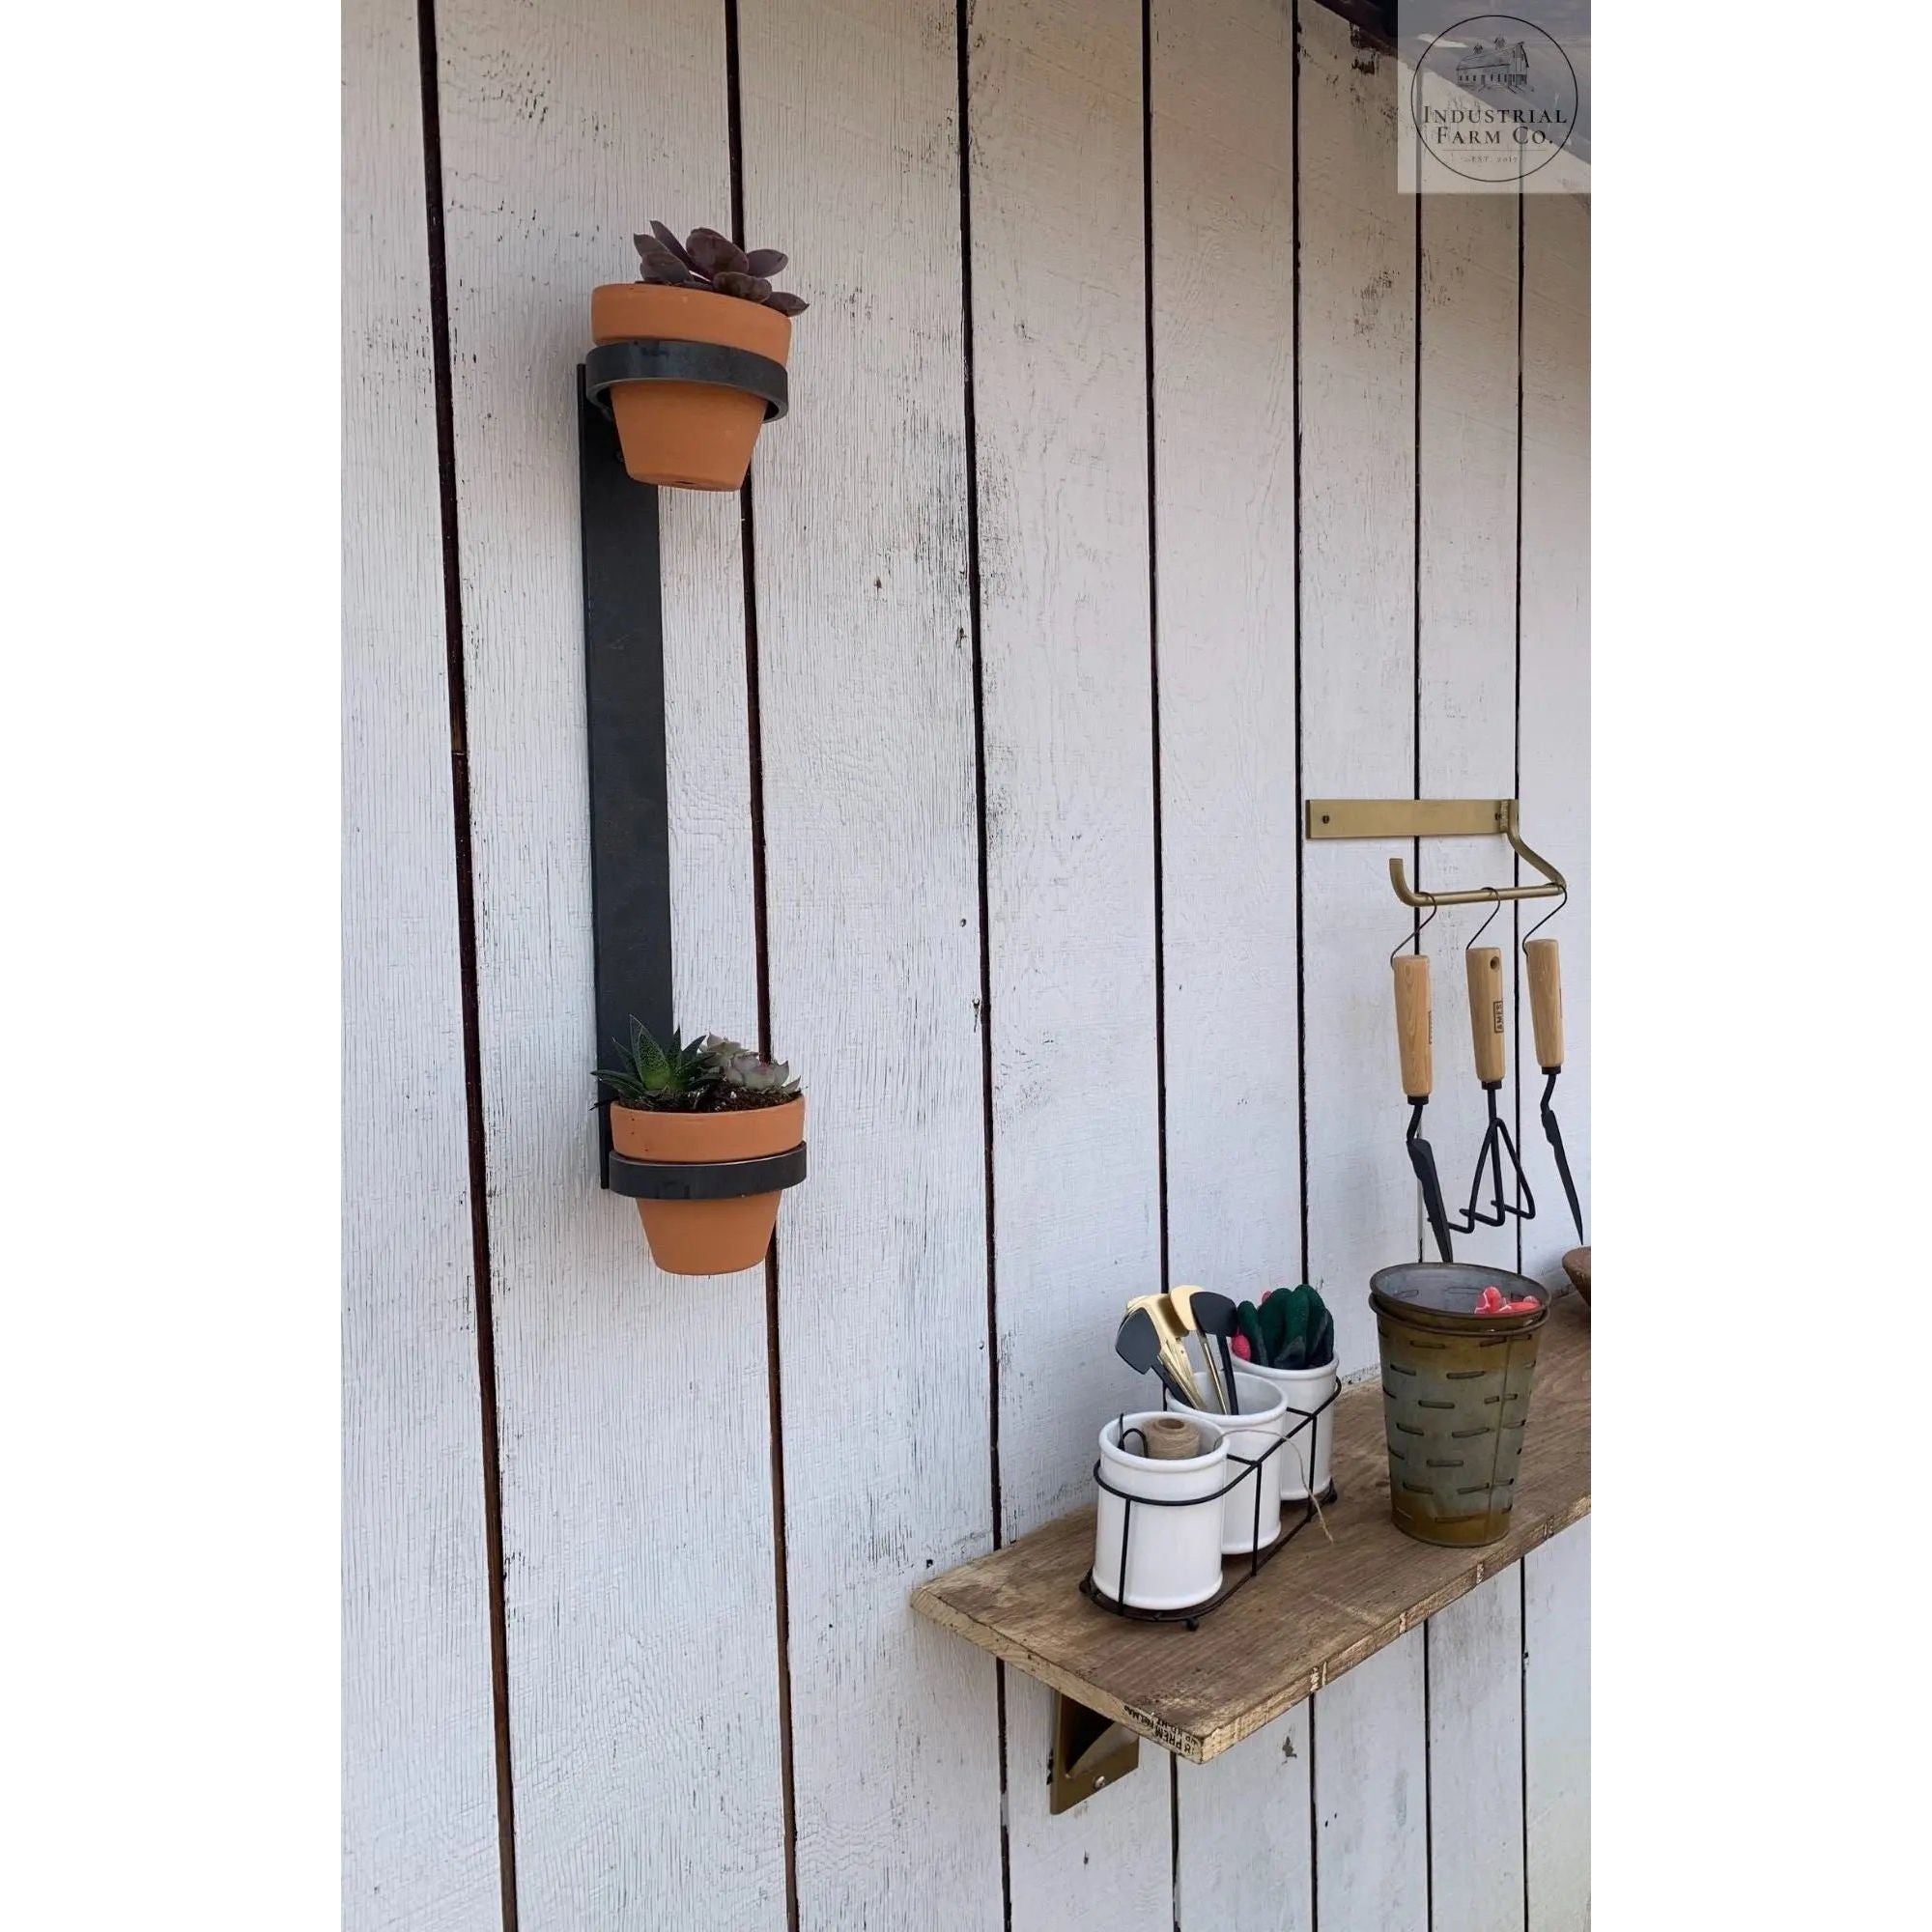 The Watertown Wall Mount Vertical Planter Plant Holder 24" Style 6" Pots | Industrial Farm Co